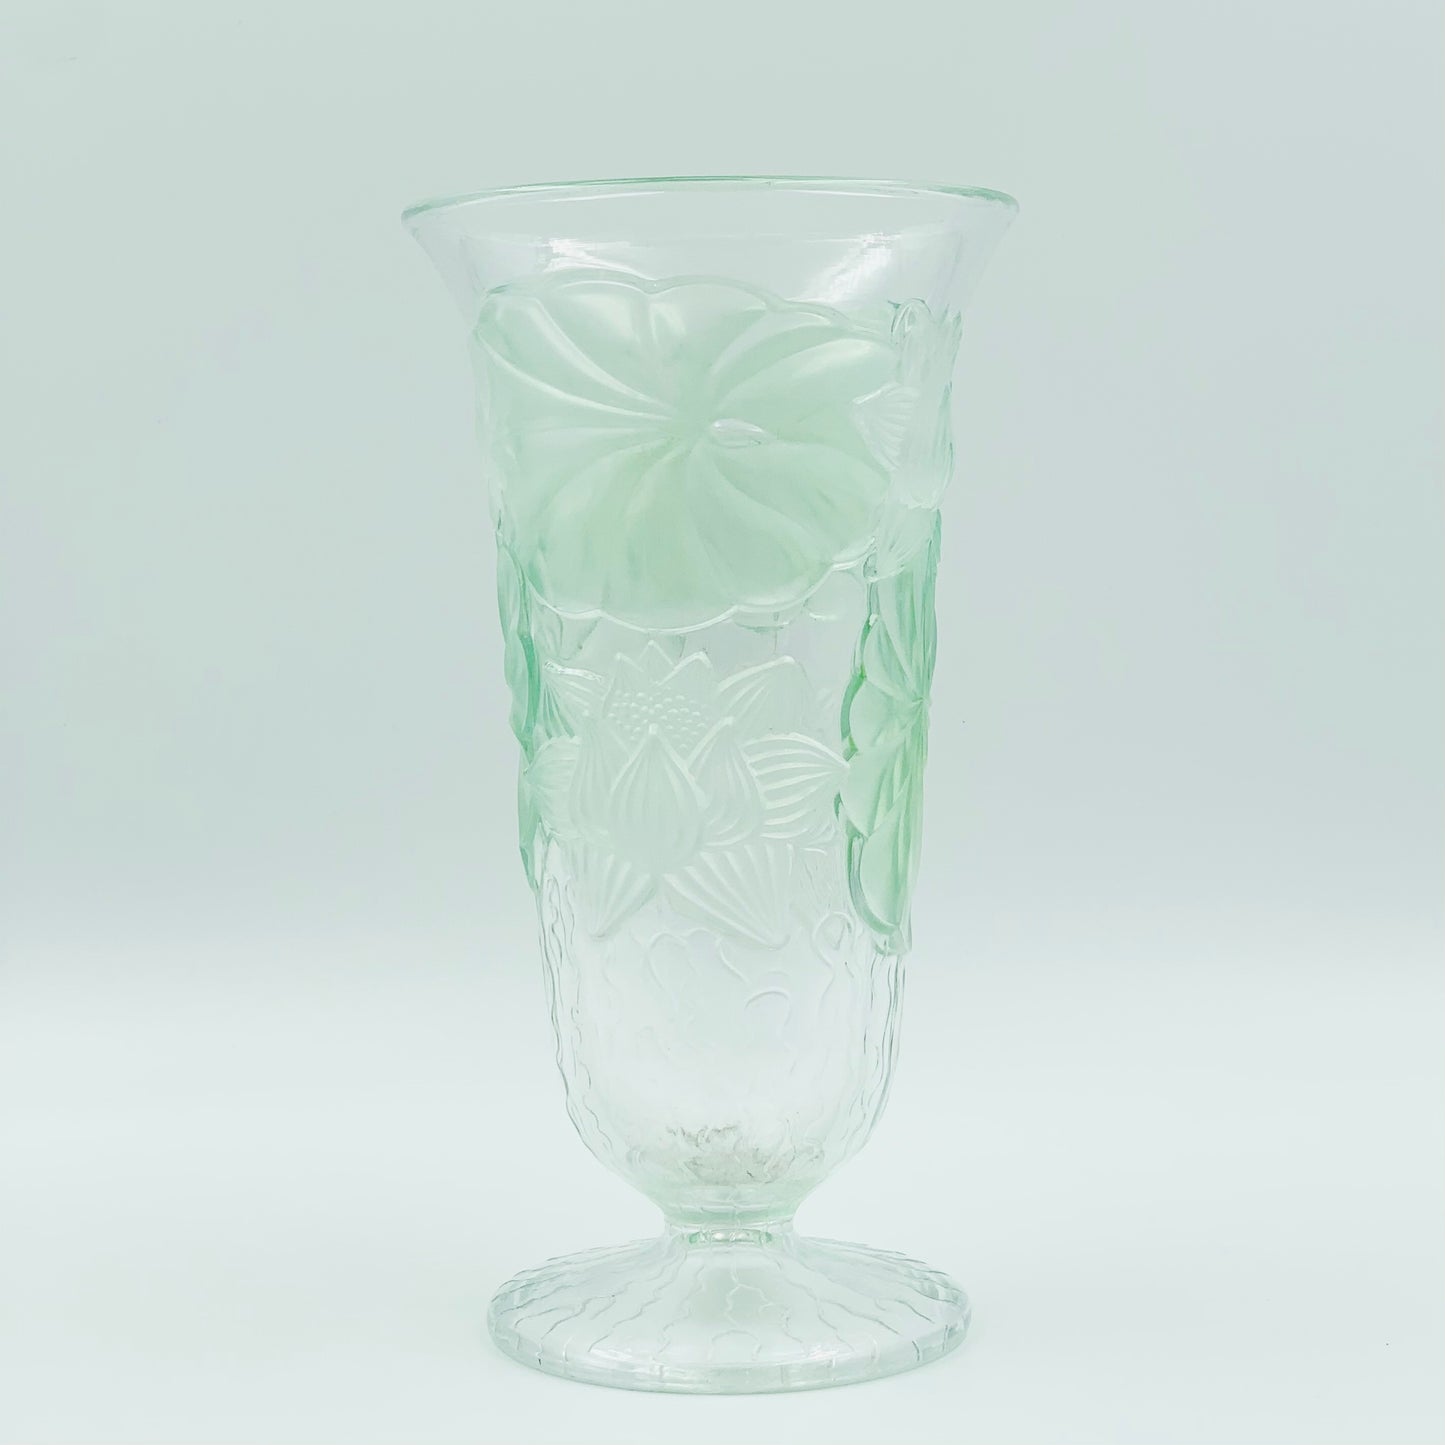 Antique Depression glass footed vase with green floral motif